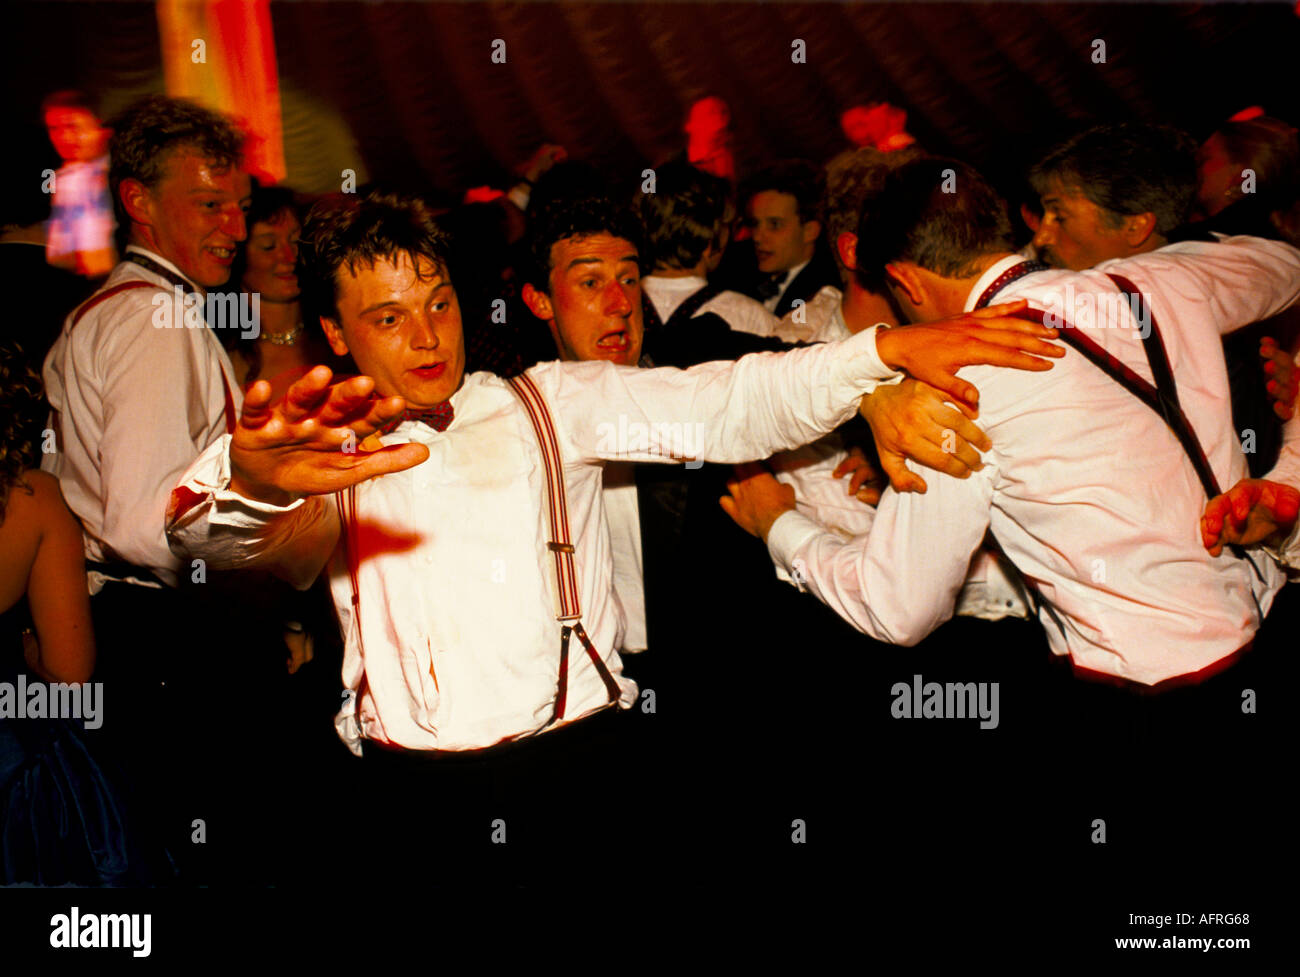 Student revellers 1990s UK. Drunk students dancing with each other Cirencester Royal Agricultural College end of year Mat Ball 1995 HOMER SYKES Stock Photo